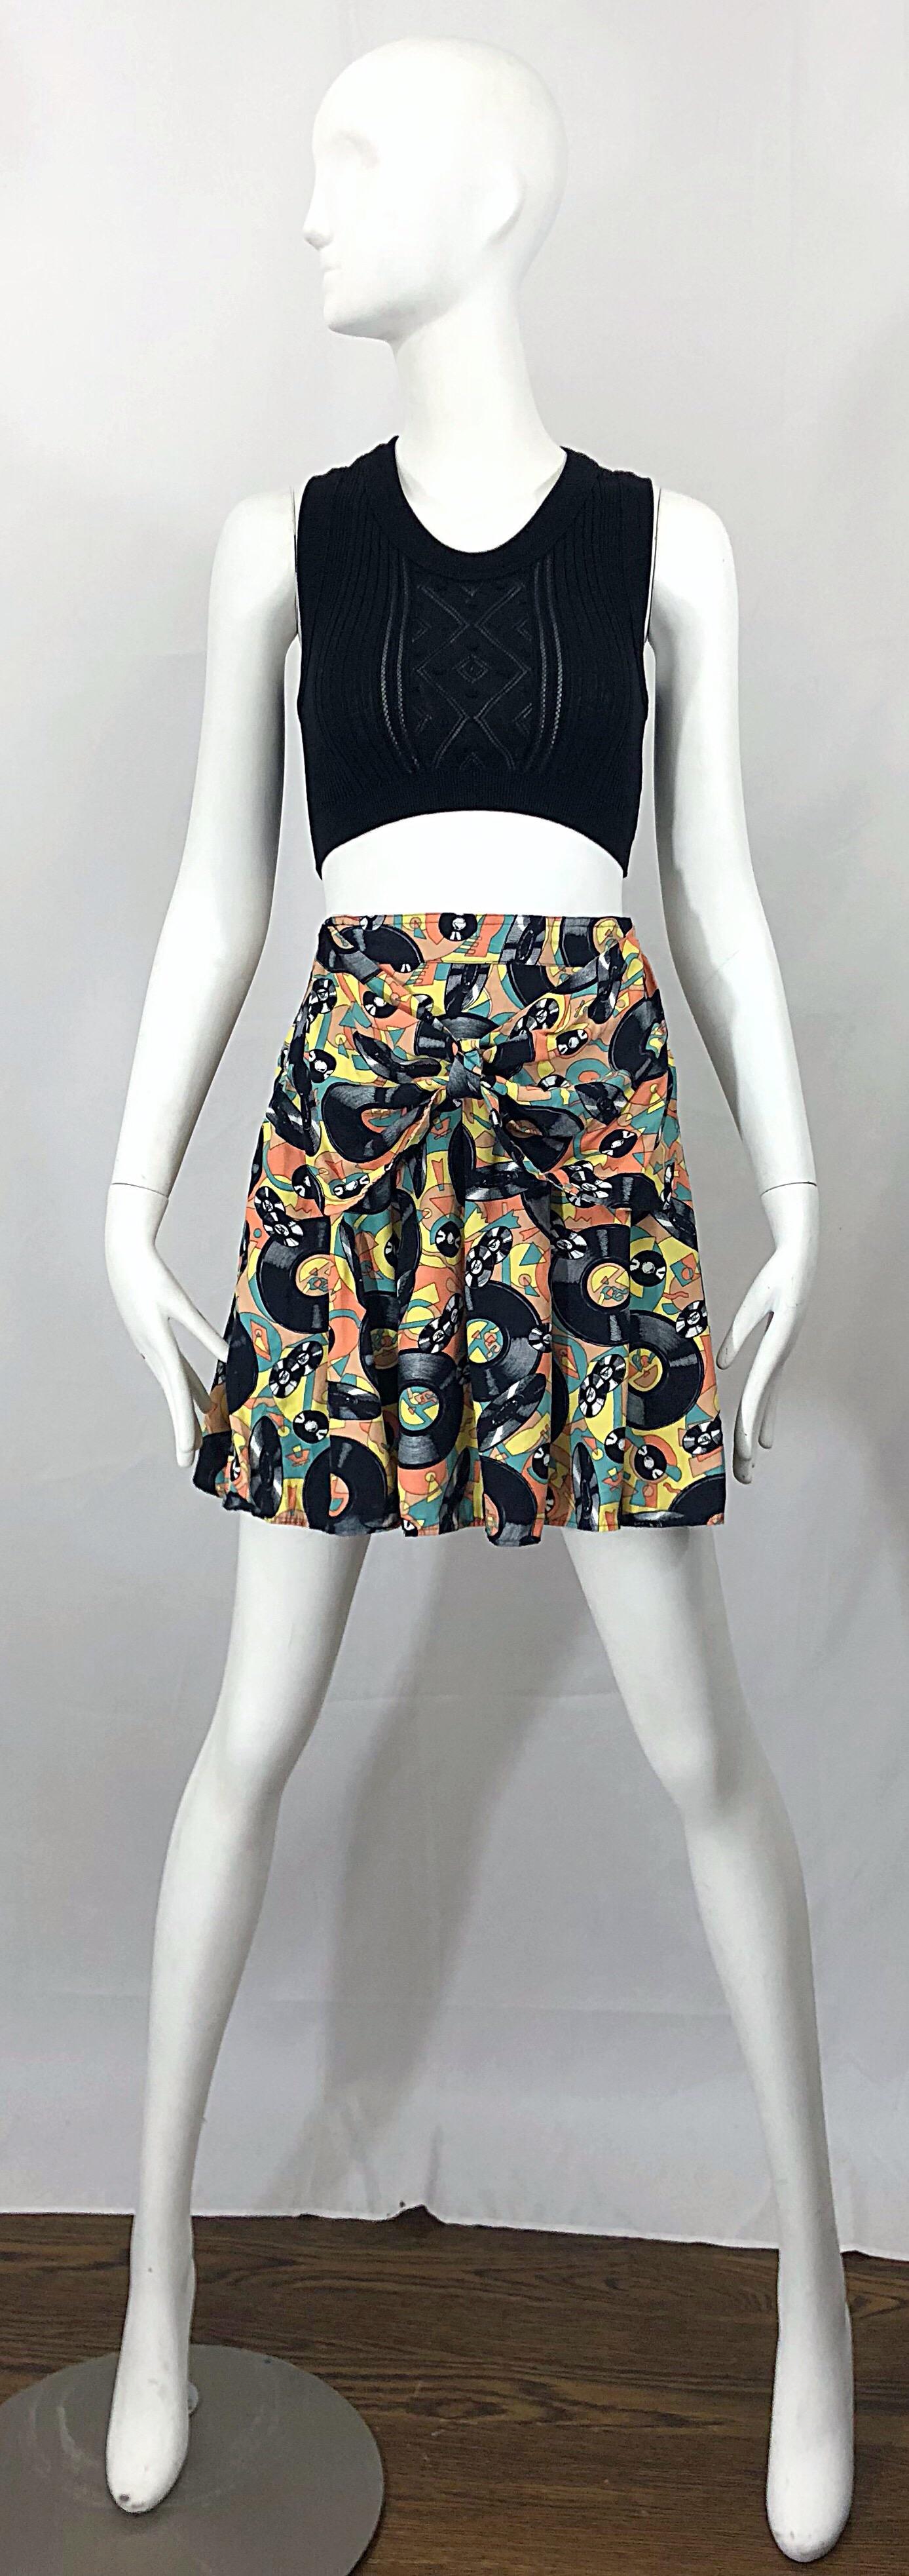 Awesome early 90s record novelty print music themed mini skirt! Features records, with a 50s diner background. Unique bow detail at front waist. Soft fabric feels like a rayon cotton blend. Hidden zipper up the side. The vintage Jean Paul Gaultier